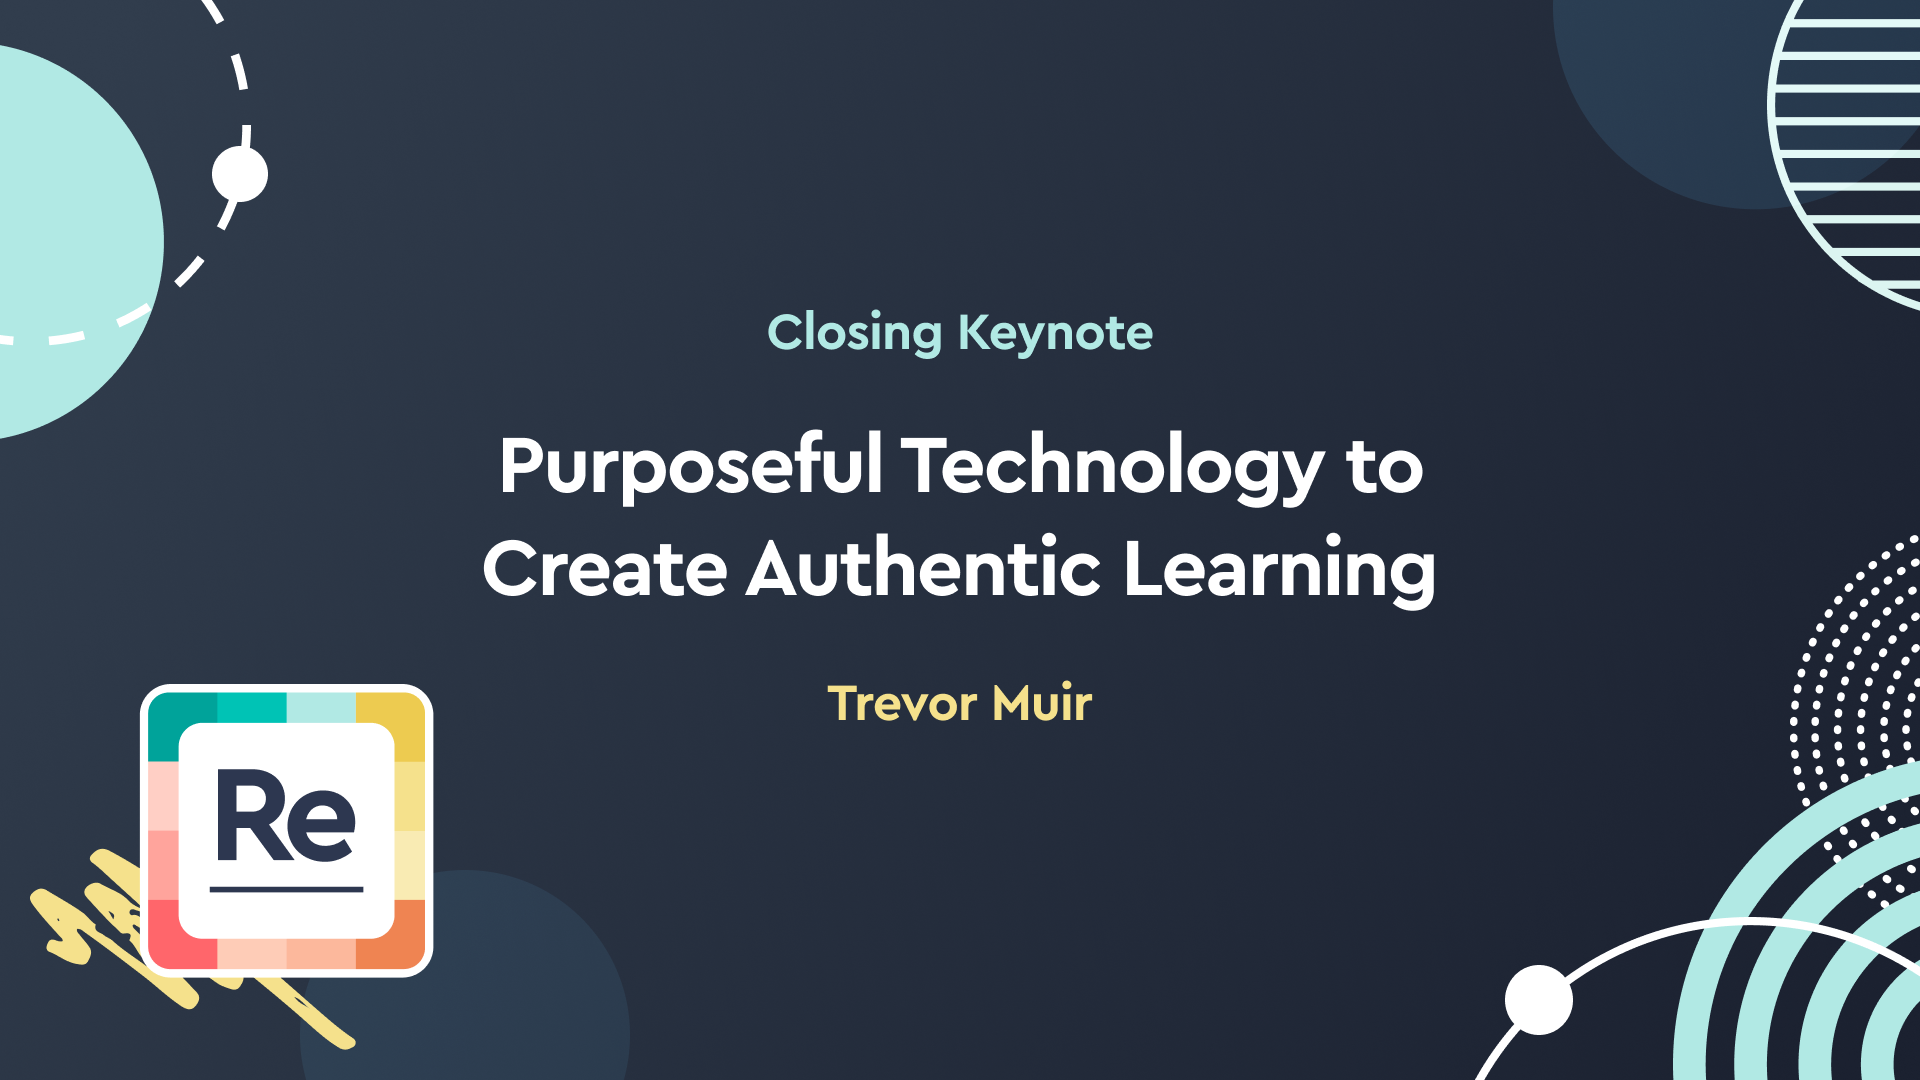 Purposeful Technology to Create Authentic Learning